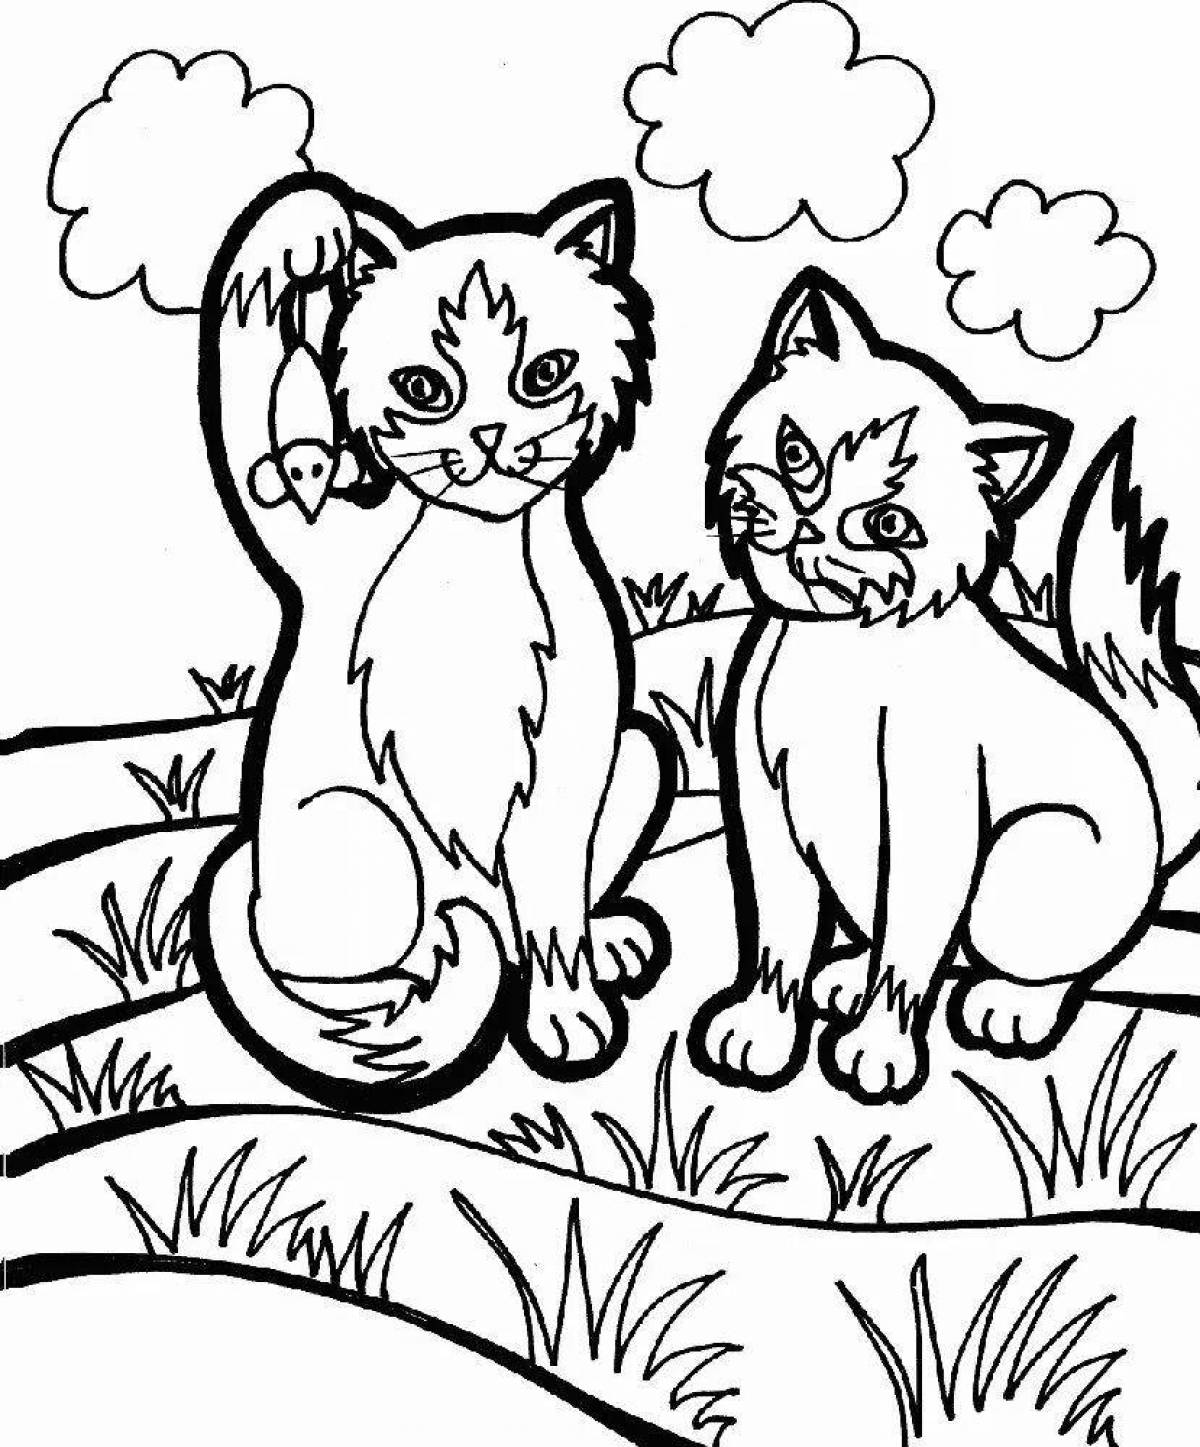 Fun coloring book 9 years for girls with cats